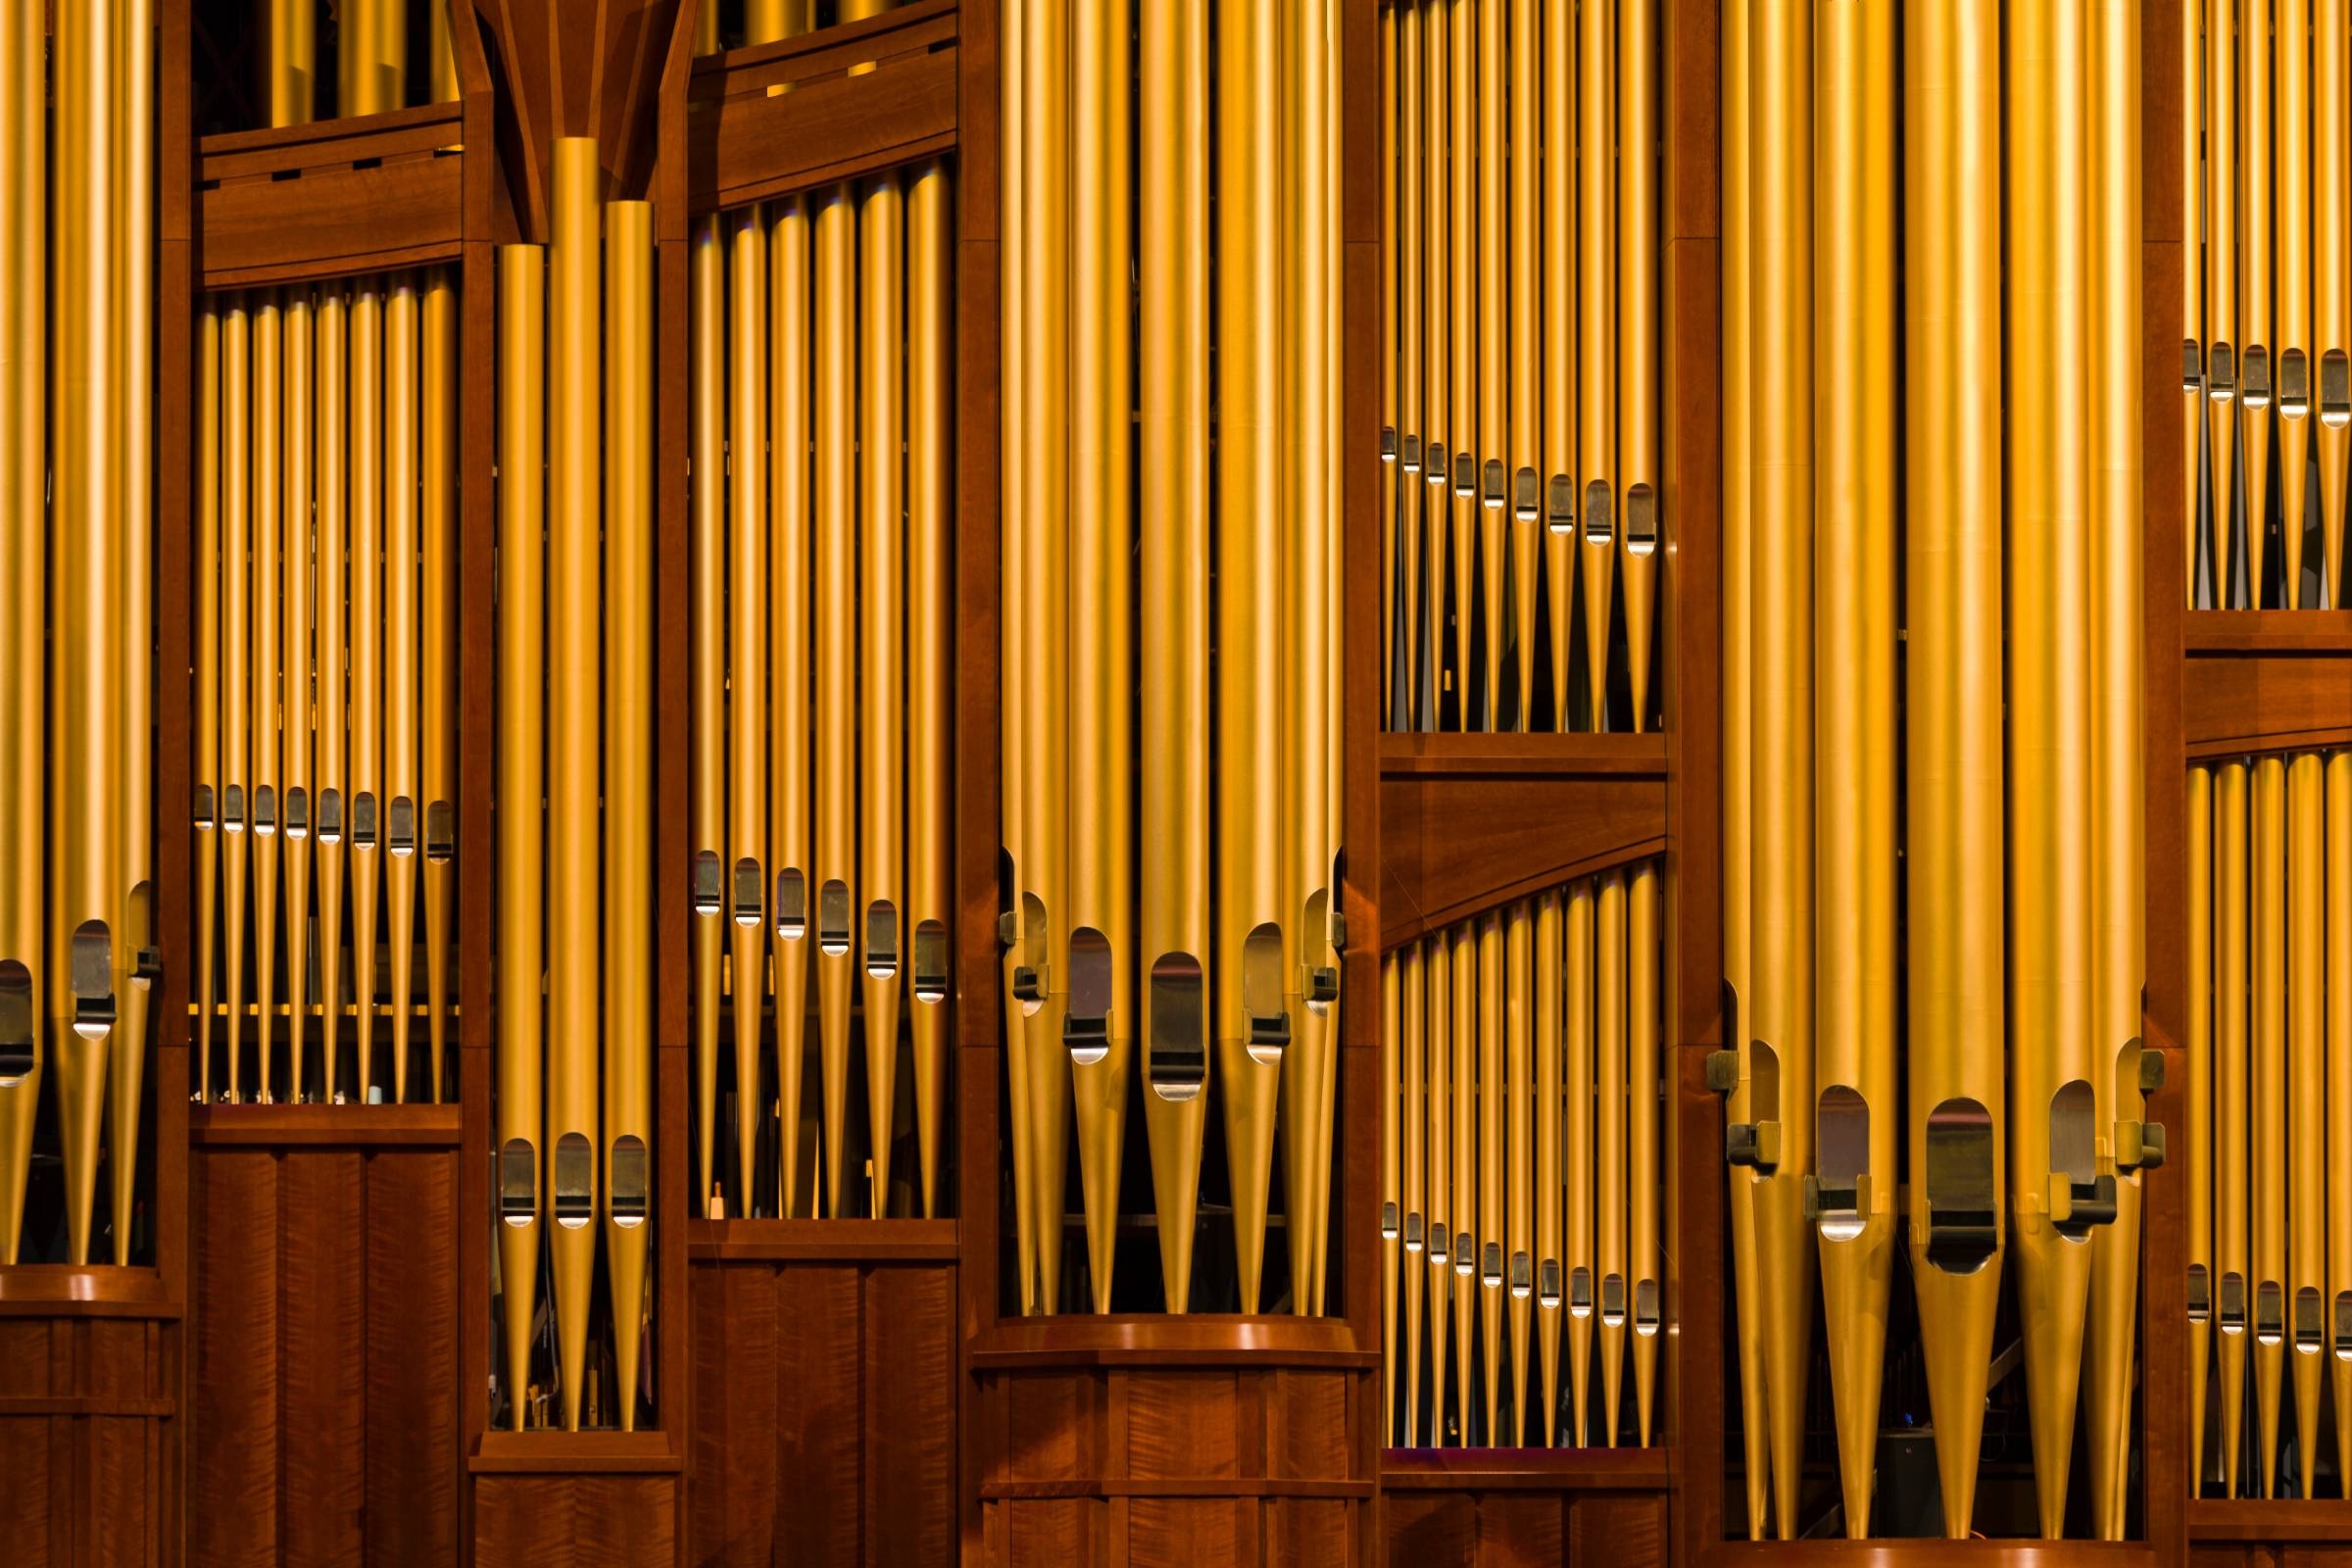 Pipe Organ: Pressurized air produces notes through a series of tubes organized in scalelike rows. 2400x1600 HD Wallpaper.